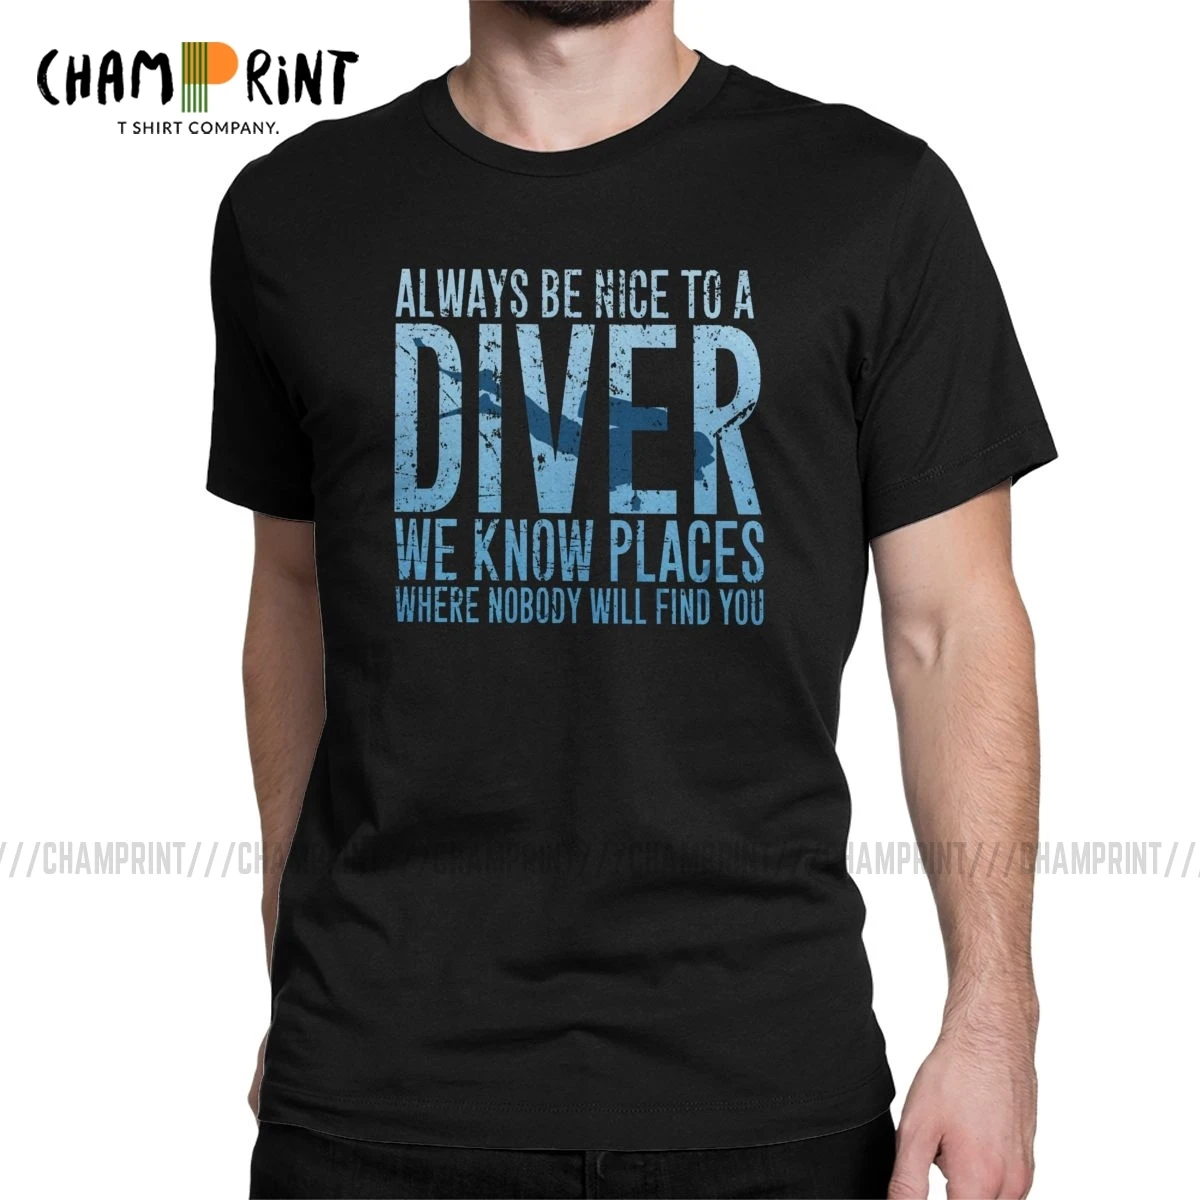 

Be Nice To A Diver Scuba Diving T Shirts Men's Novelty T-Shirts Scuba Diver Funny Diving Dive Tees Short Sleeve Tops Gift Idea